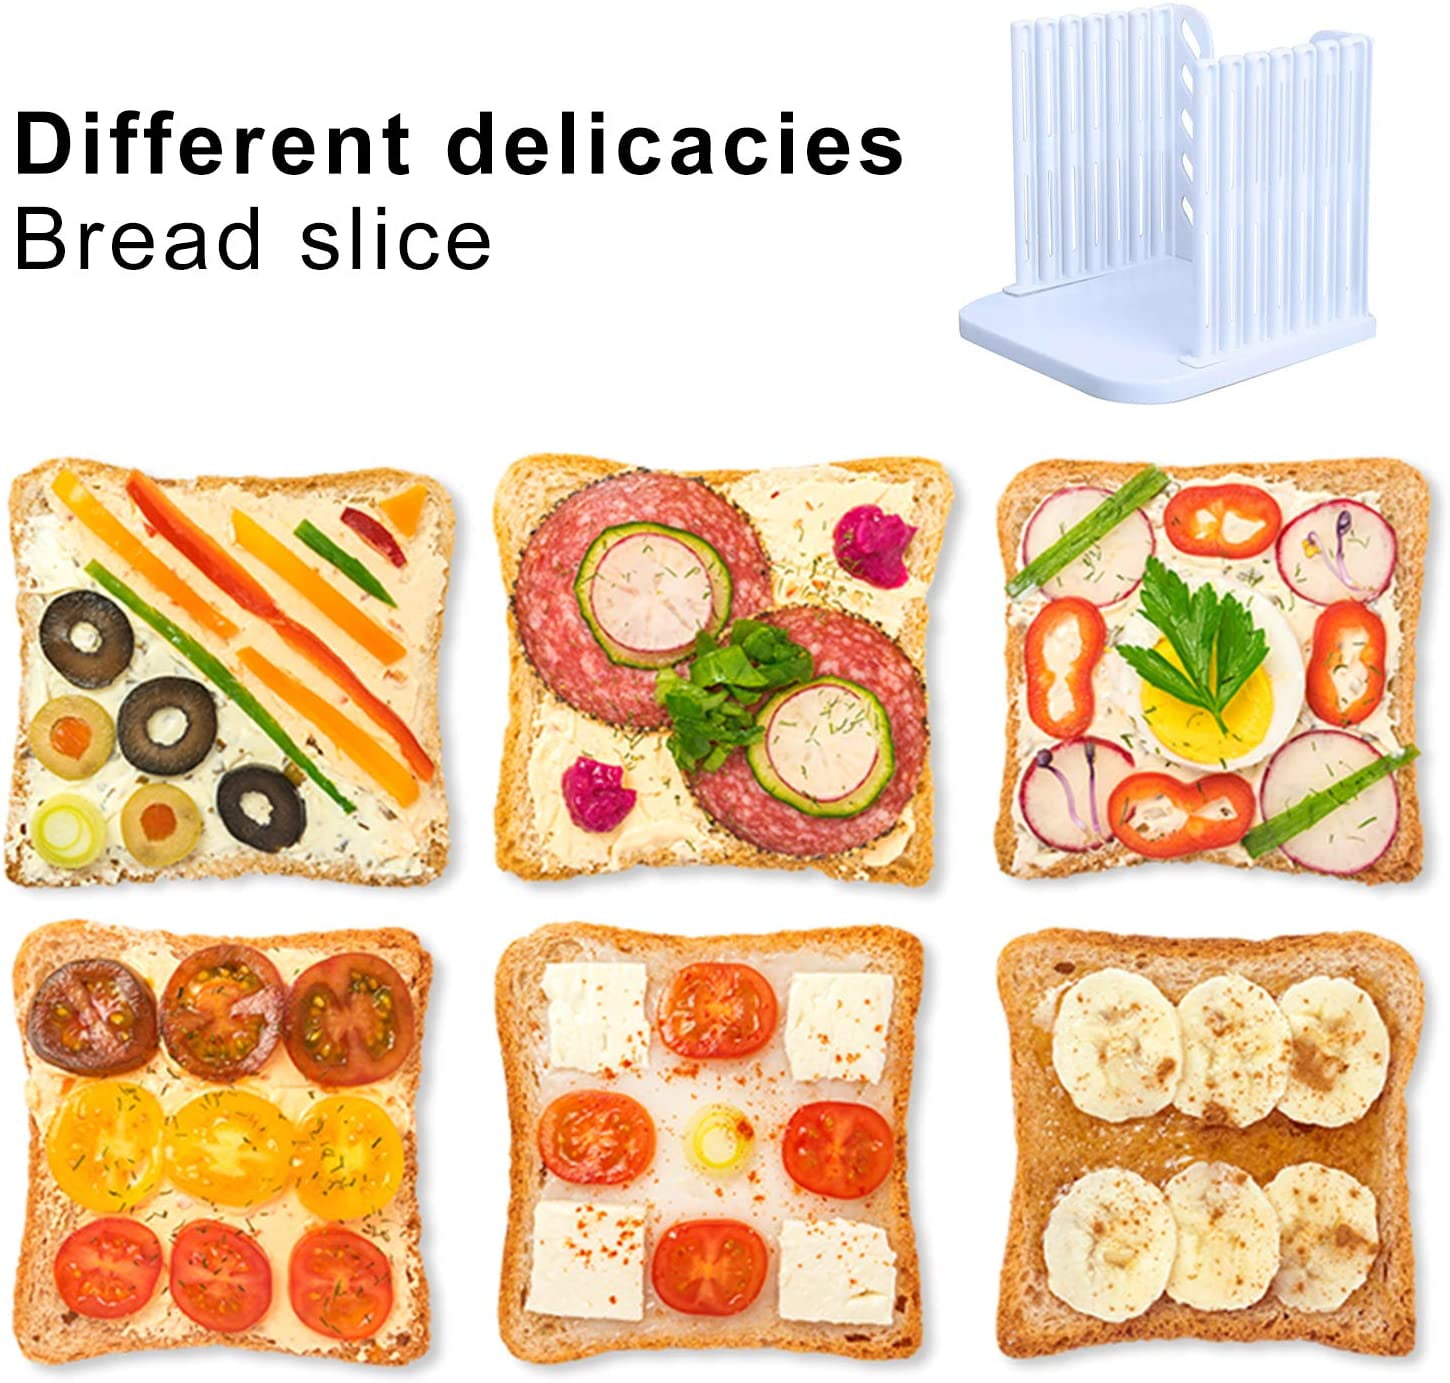 New Toast Bread Slicer Plastic Foldable Loaf Cut Rack Cutting Guide Slicing  Tool Kitchen Accessories Practical Cakes Split Tools